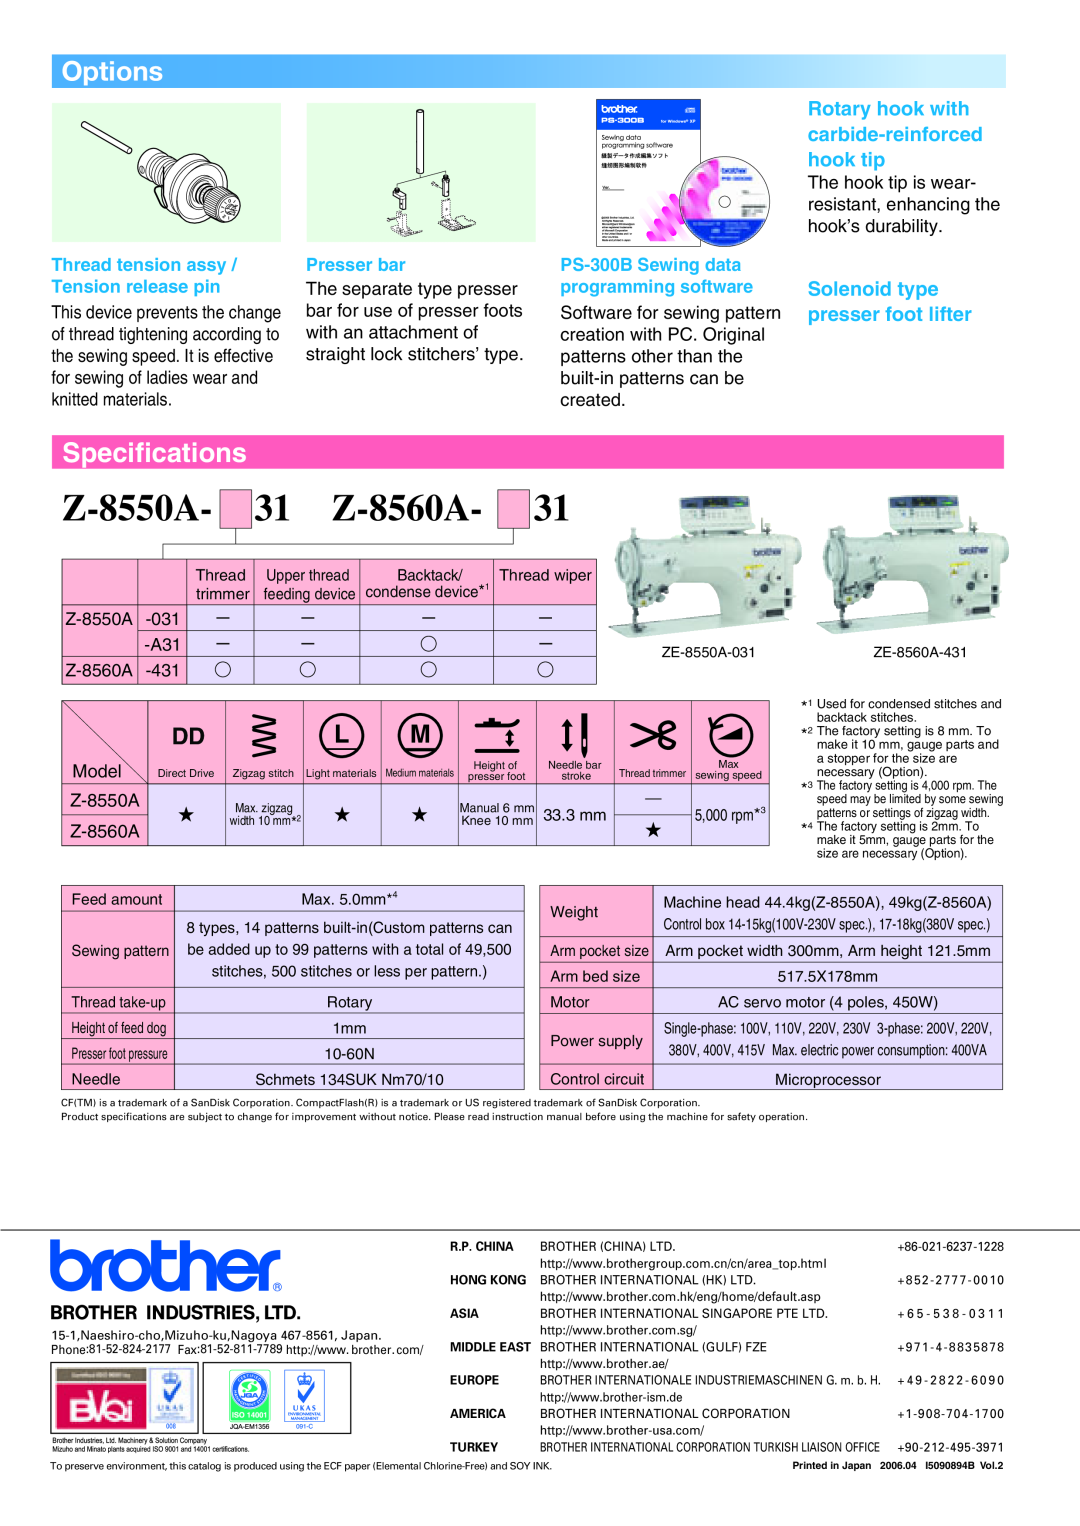 Brother Z-8550A manual Options, Z-8560A, Specifications, Rotary hook with carbide-reinforced hook tip, Presser bar 